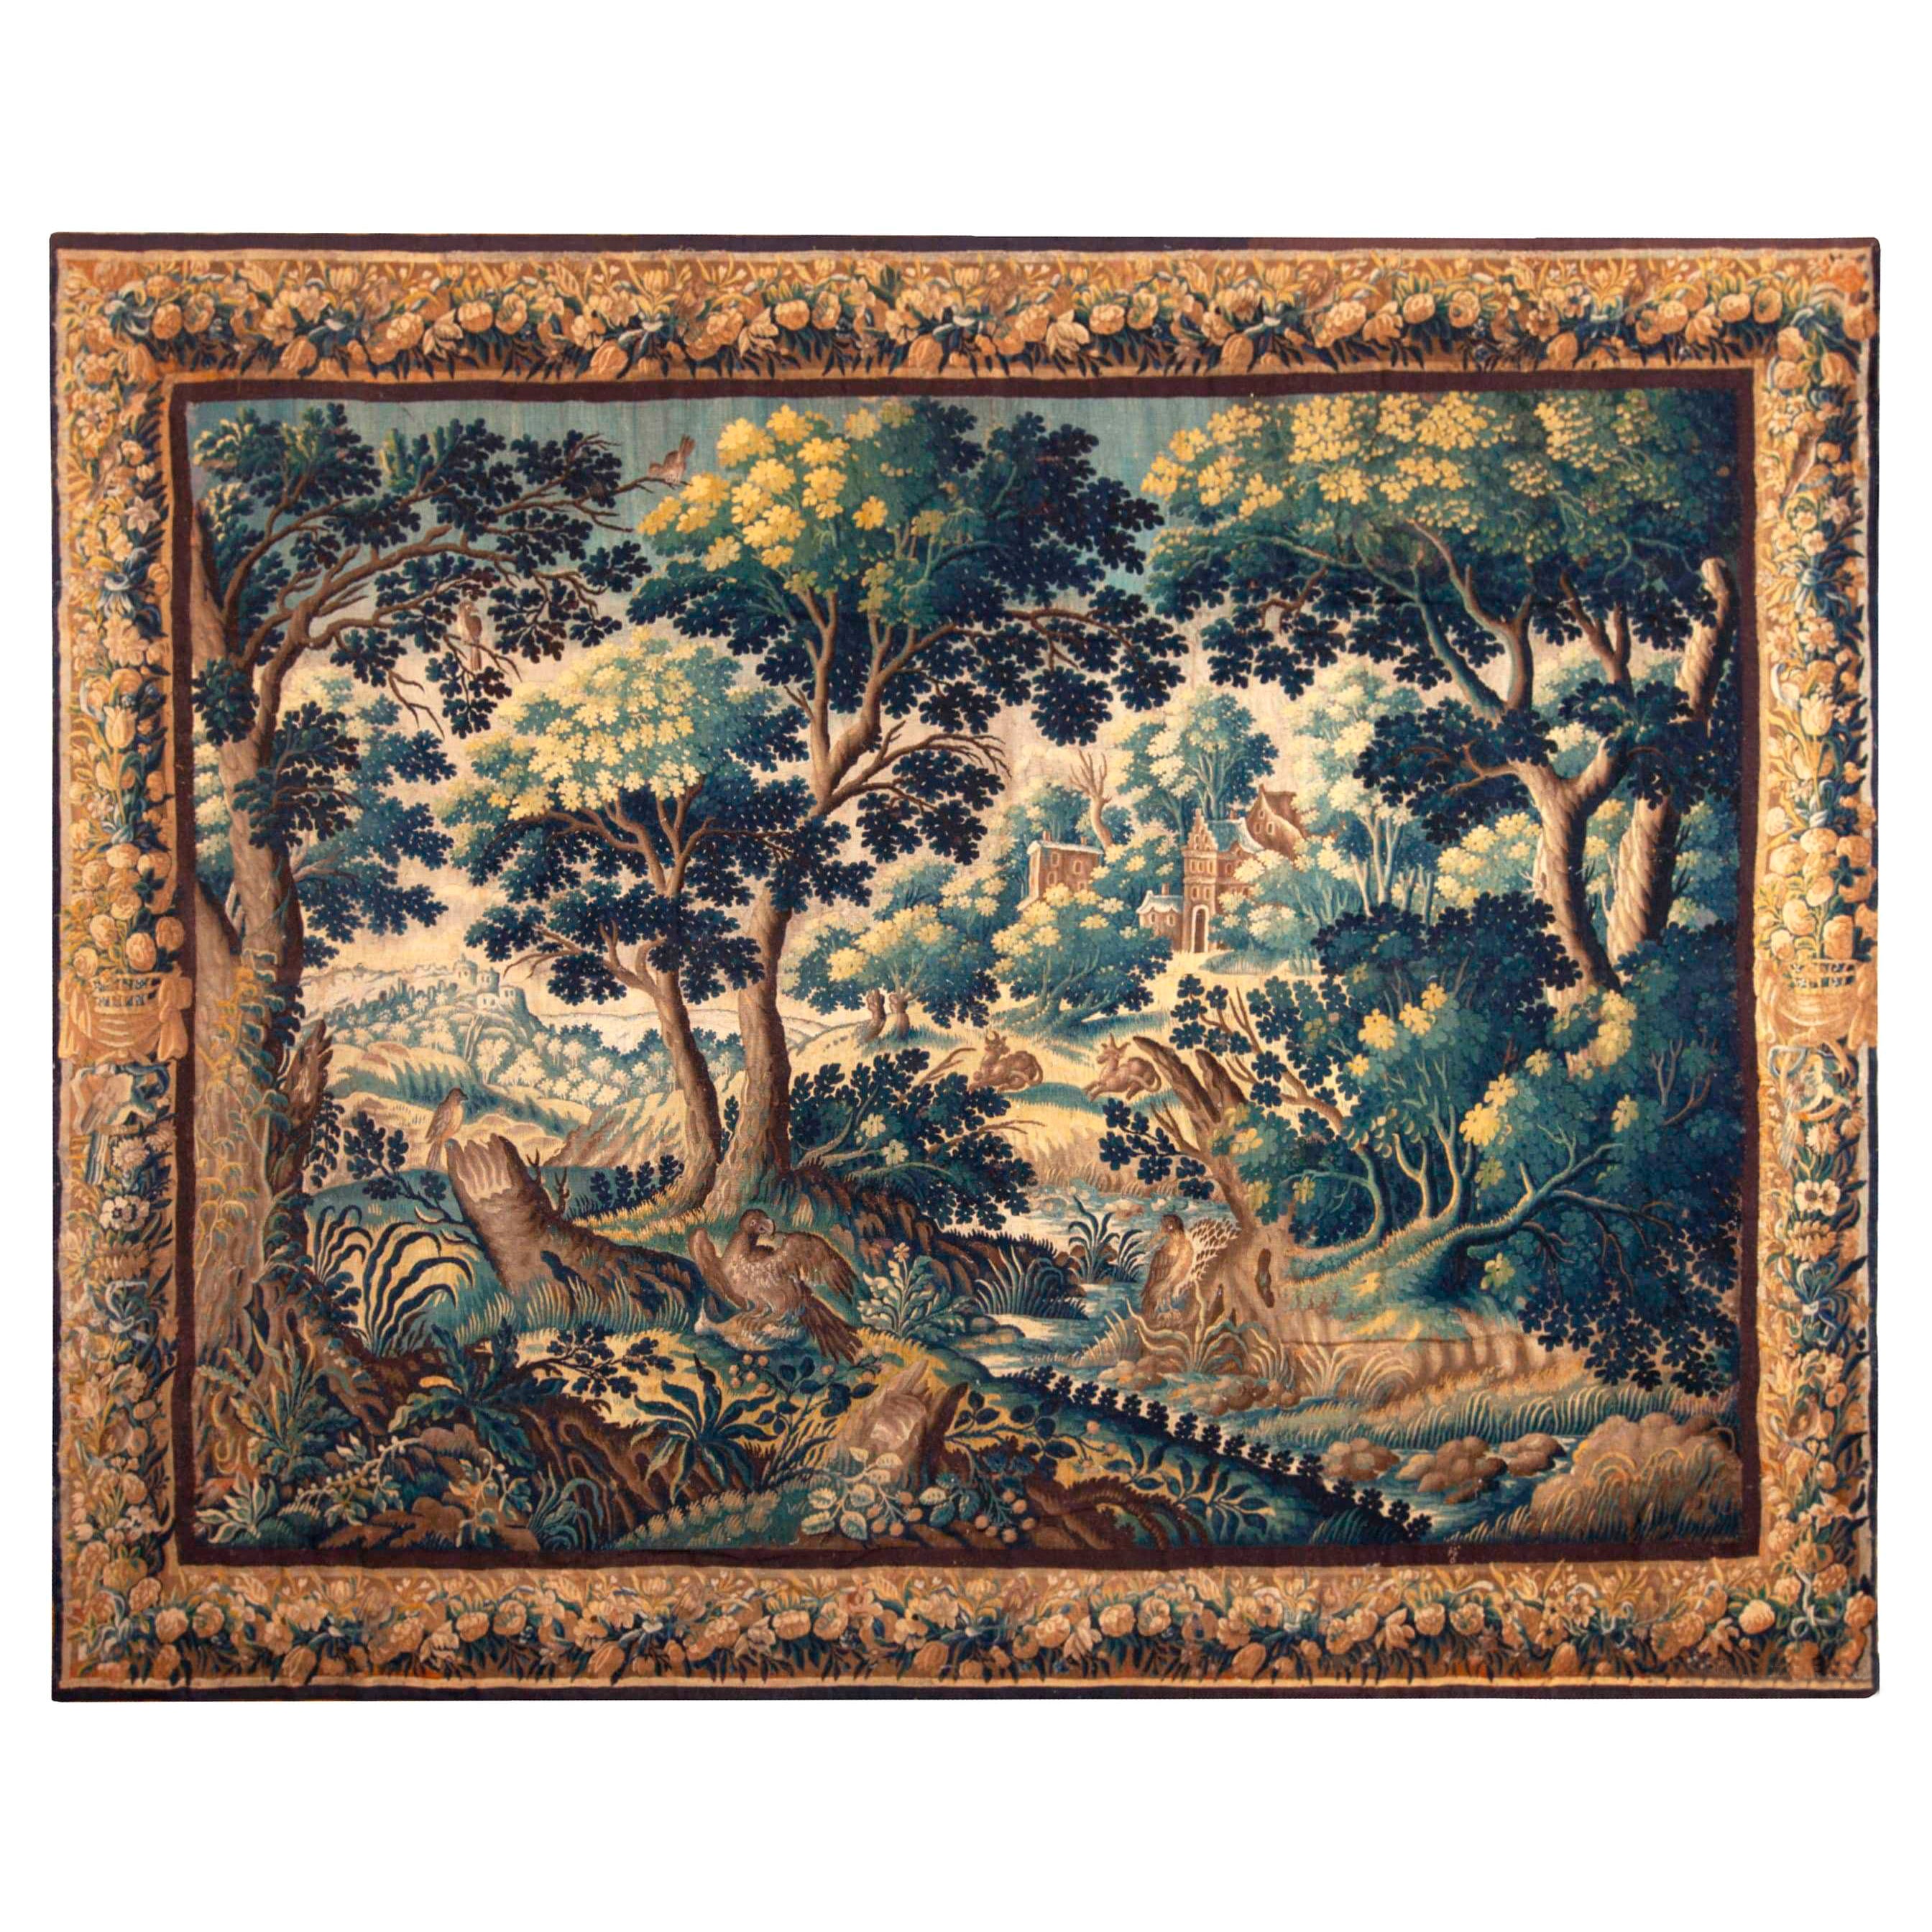 Collectible 17th Century Antique French Silk Verdure Tapestry 10' x 12'5" For Sale